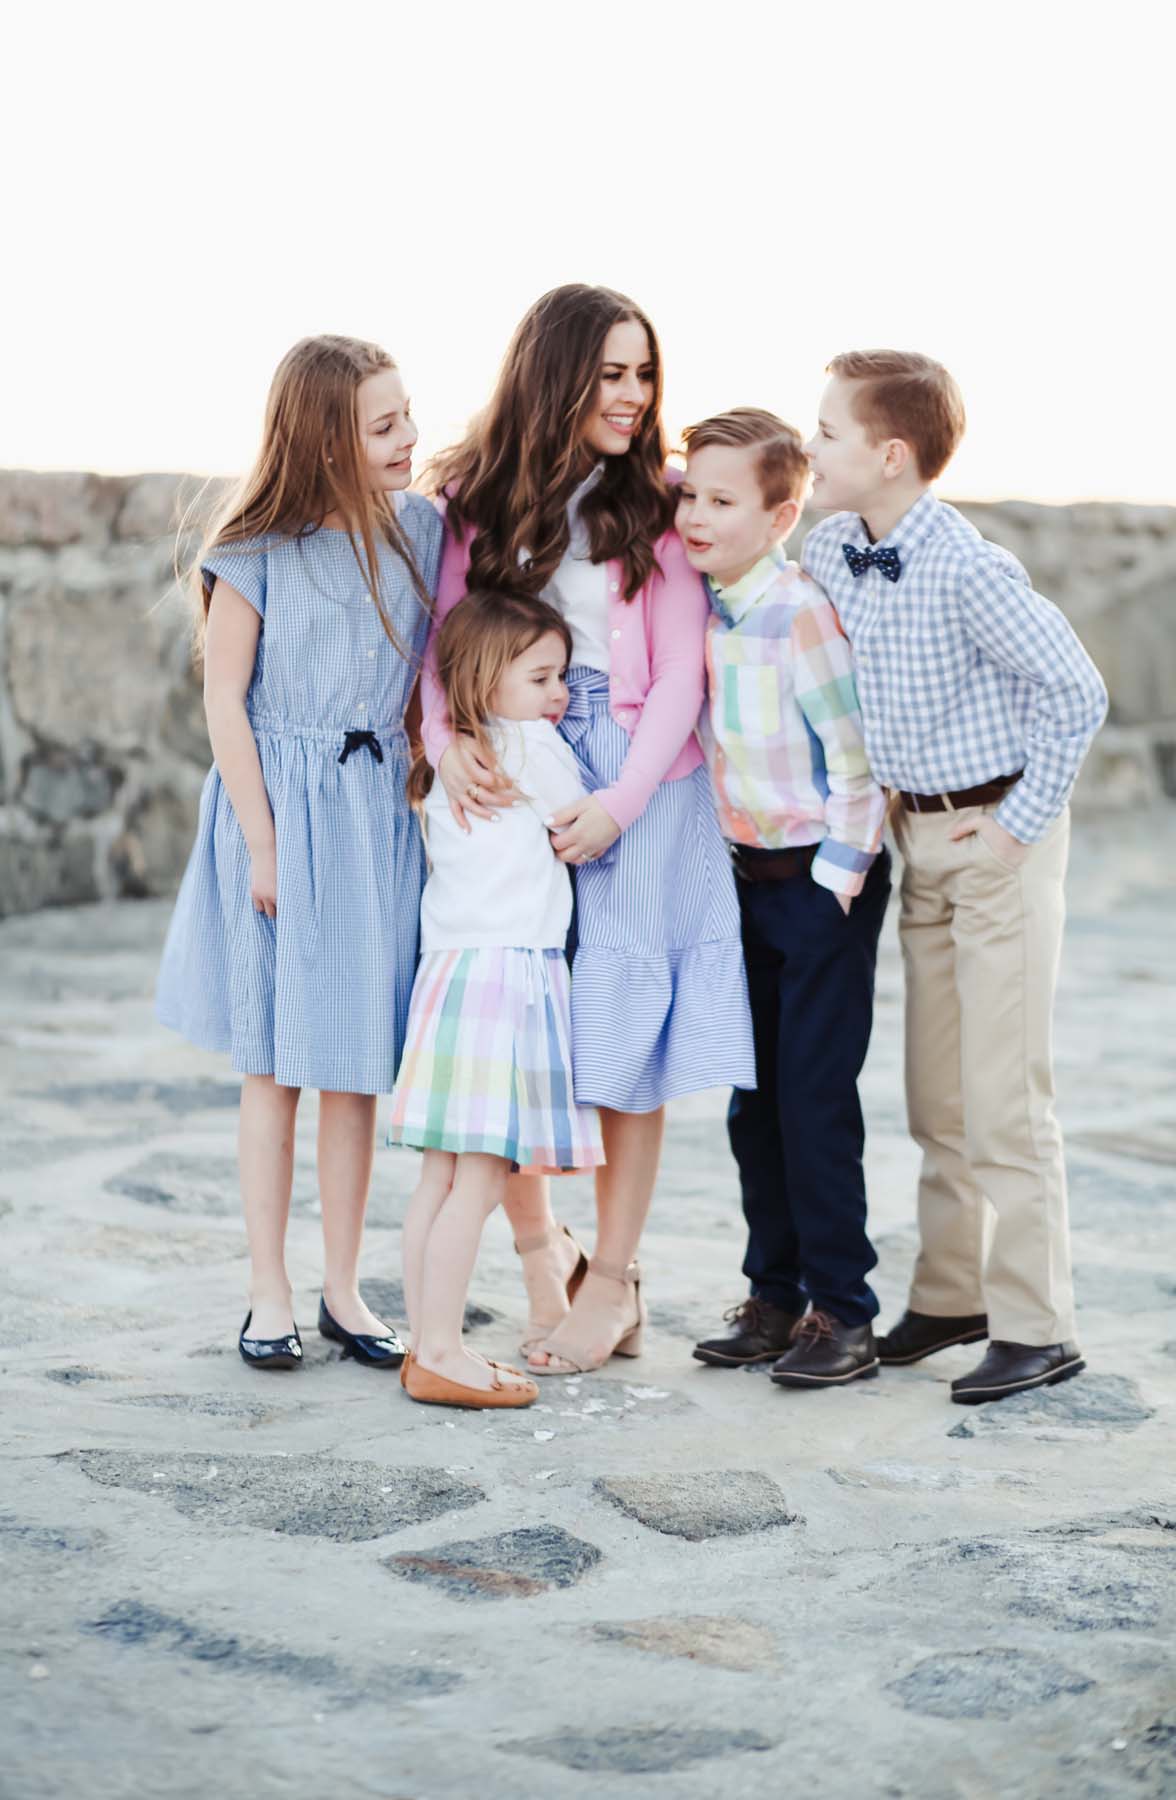 easter outfits for the whole family. - dress cori lynn